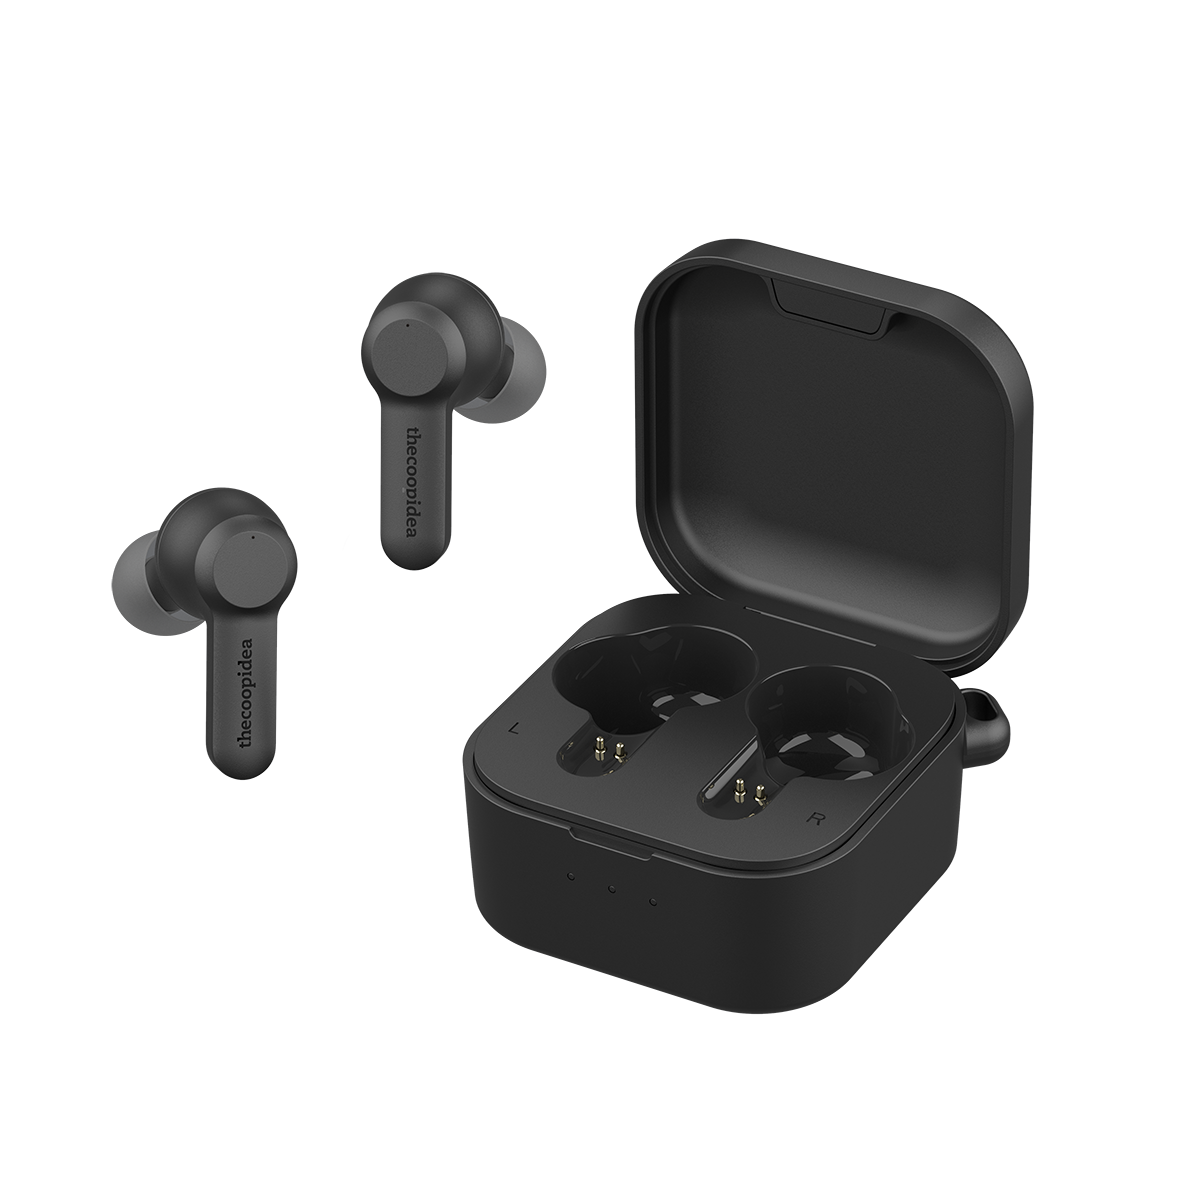 BEANS PRO 2 ANC True Wireless Earbuds | thecoopidea